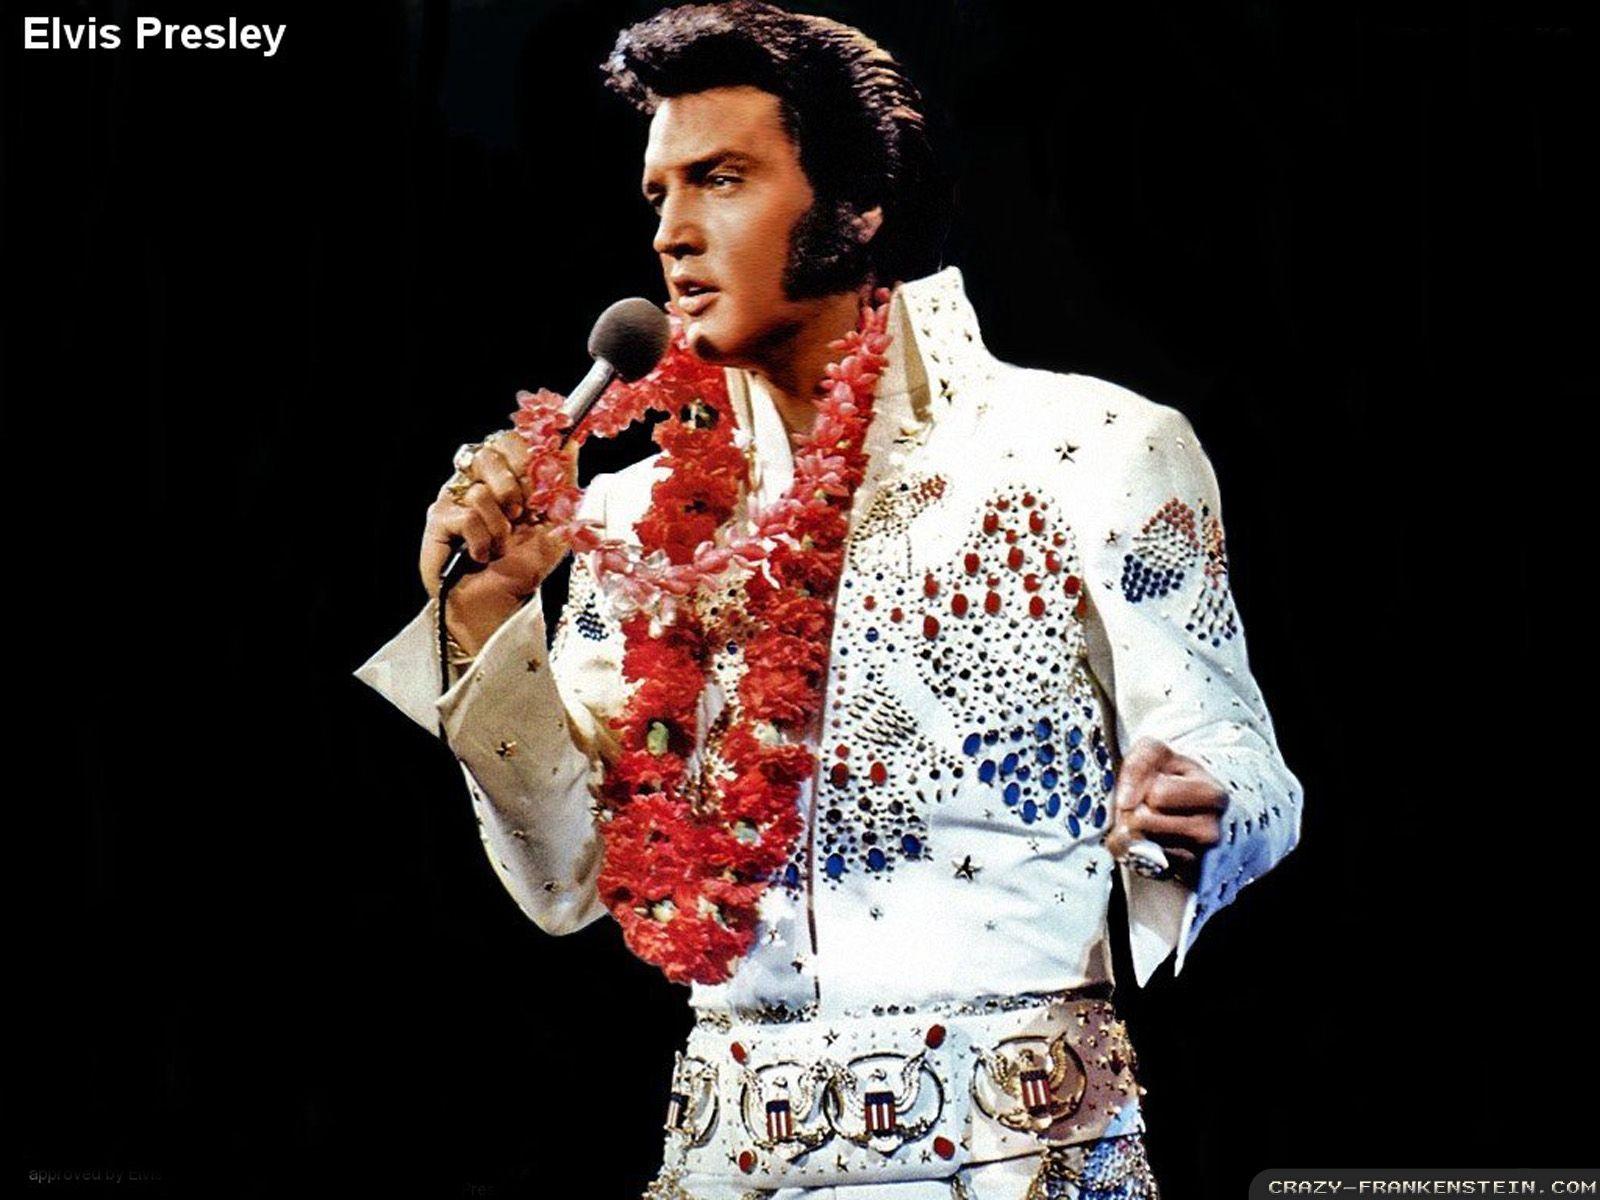 Elvis Presley Wallpaper High Resolution and Quality Download